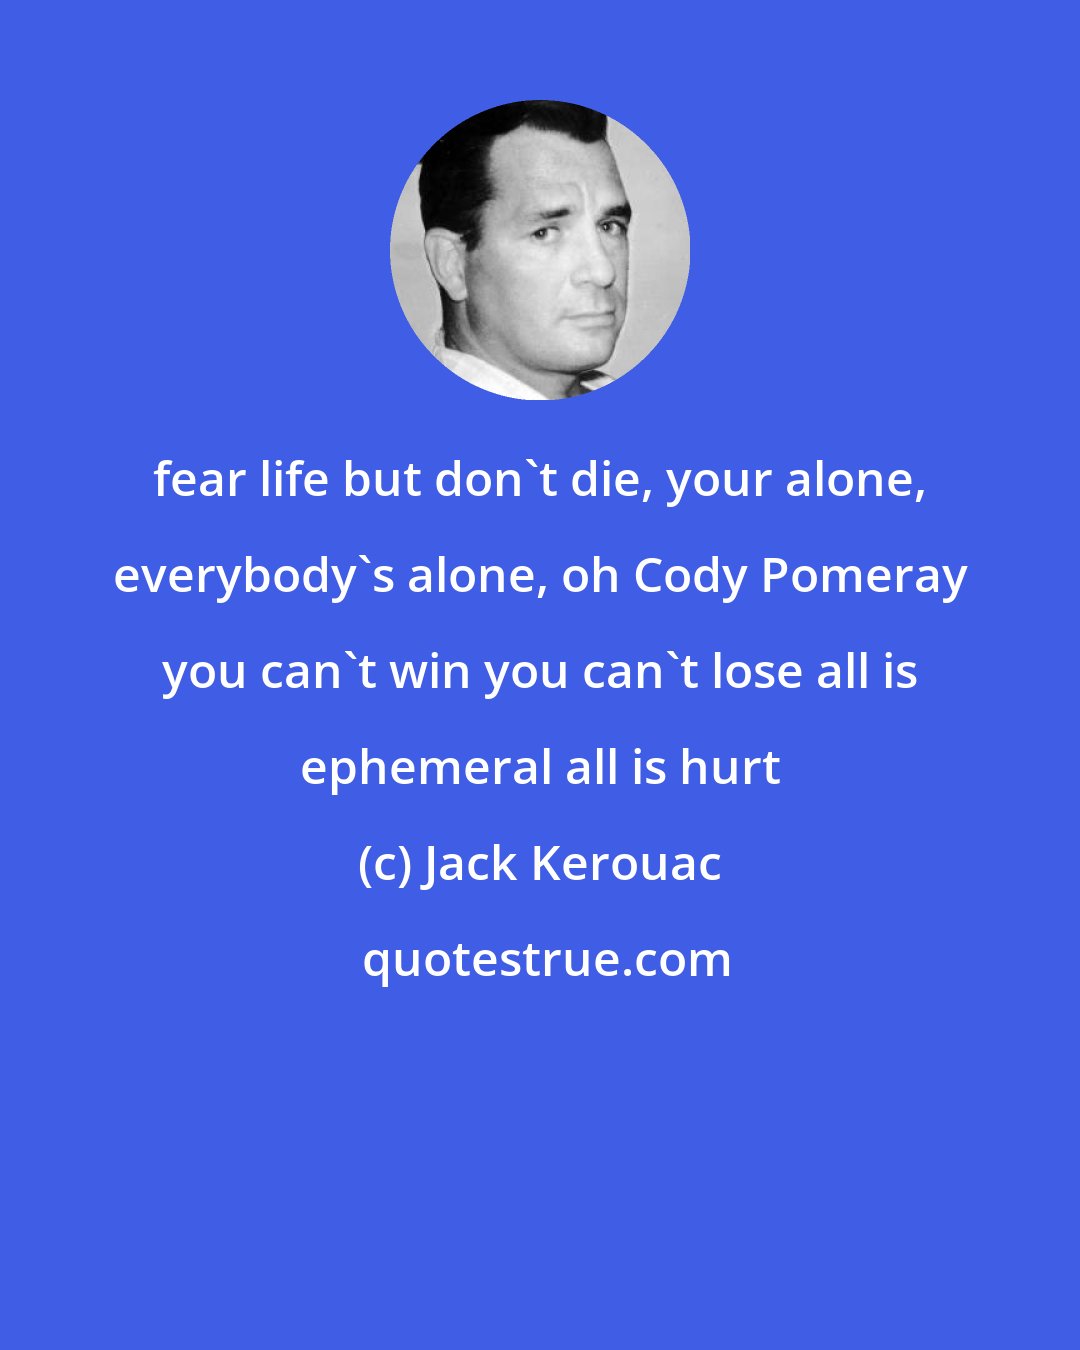 Jack Kerouac: fear life but don't die, your alone, everybody's alone, oh Cody Pomeray you can't win you can't lose all is ephemeral all is hurt